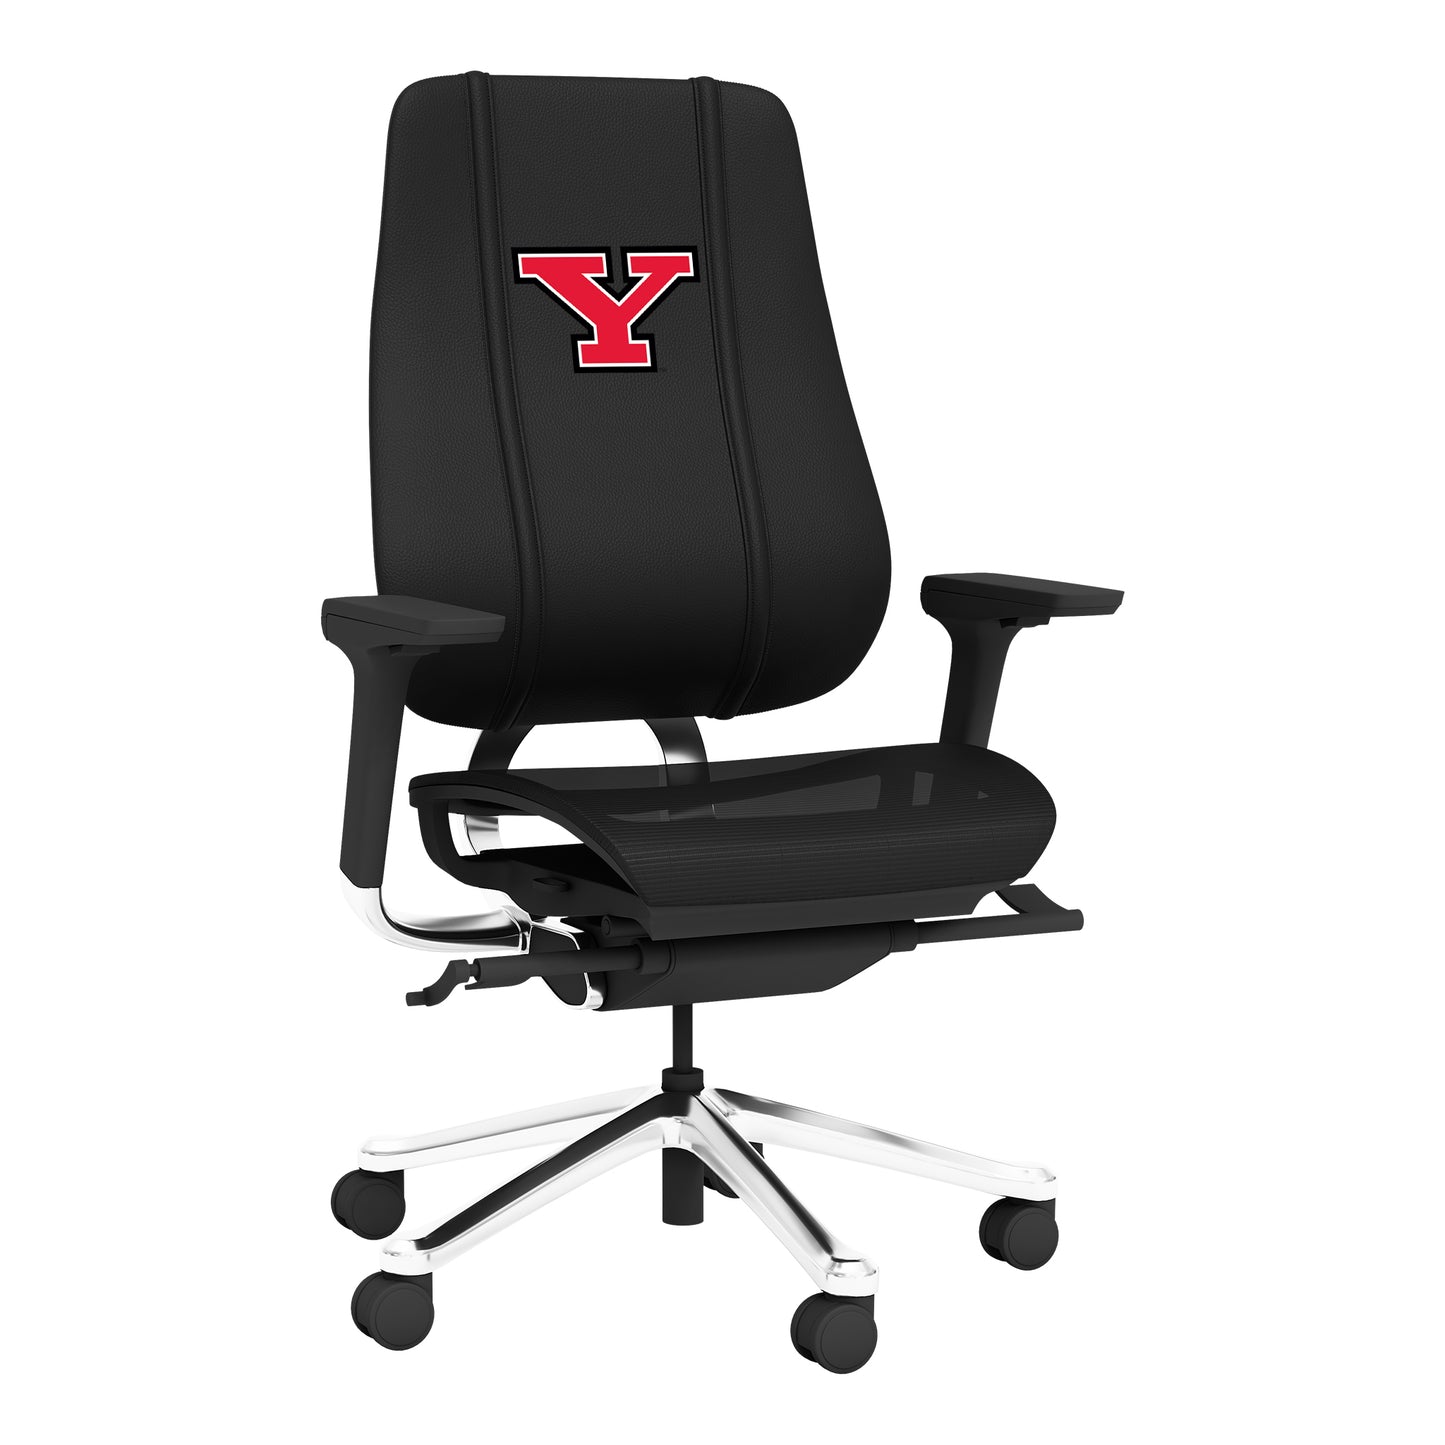 PhantomX Gaming Chair with Youngstown State Secondary Logo